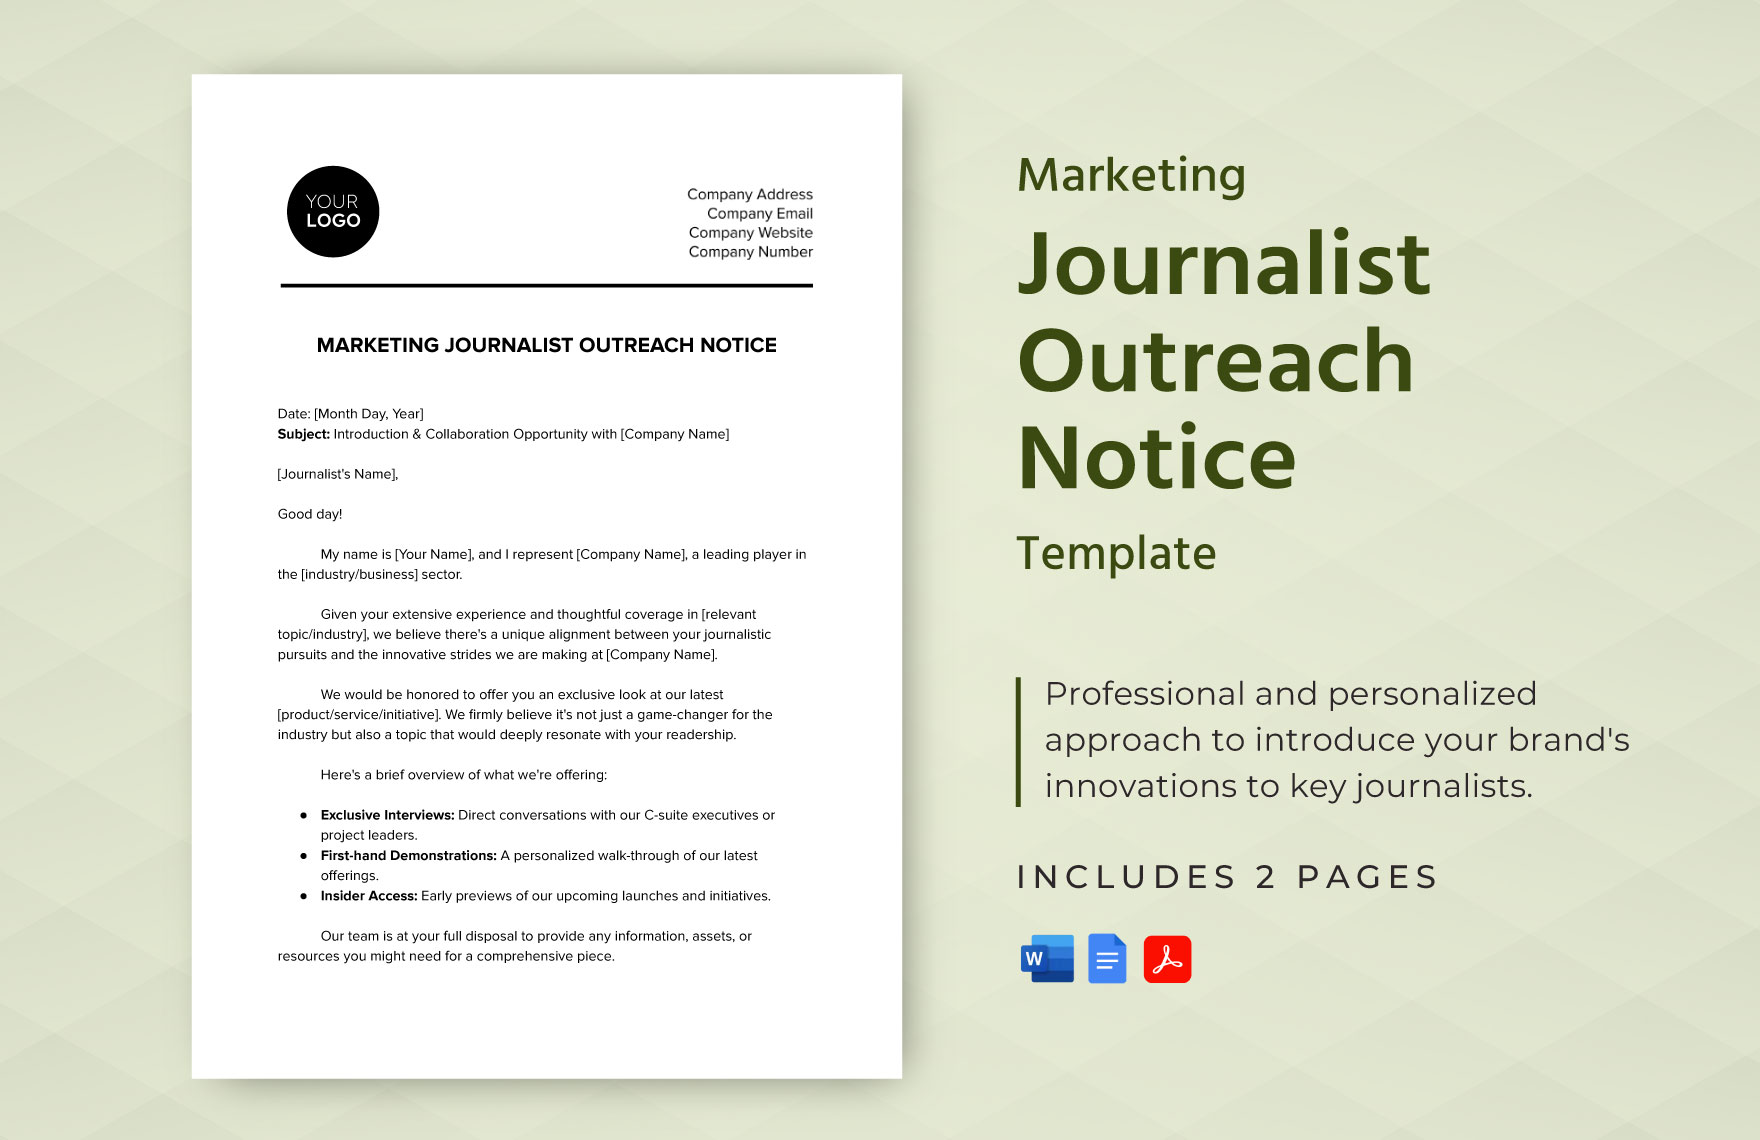 Marketing Journalist Outreach Notice Template in Word, Google Docs, PDF